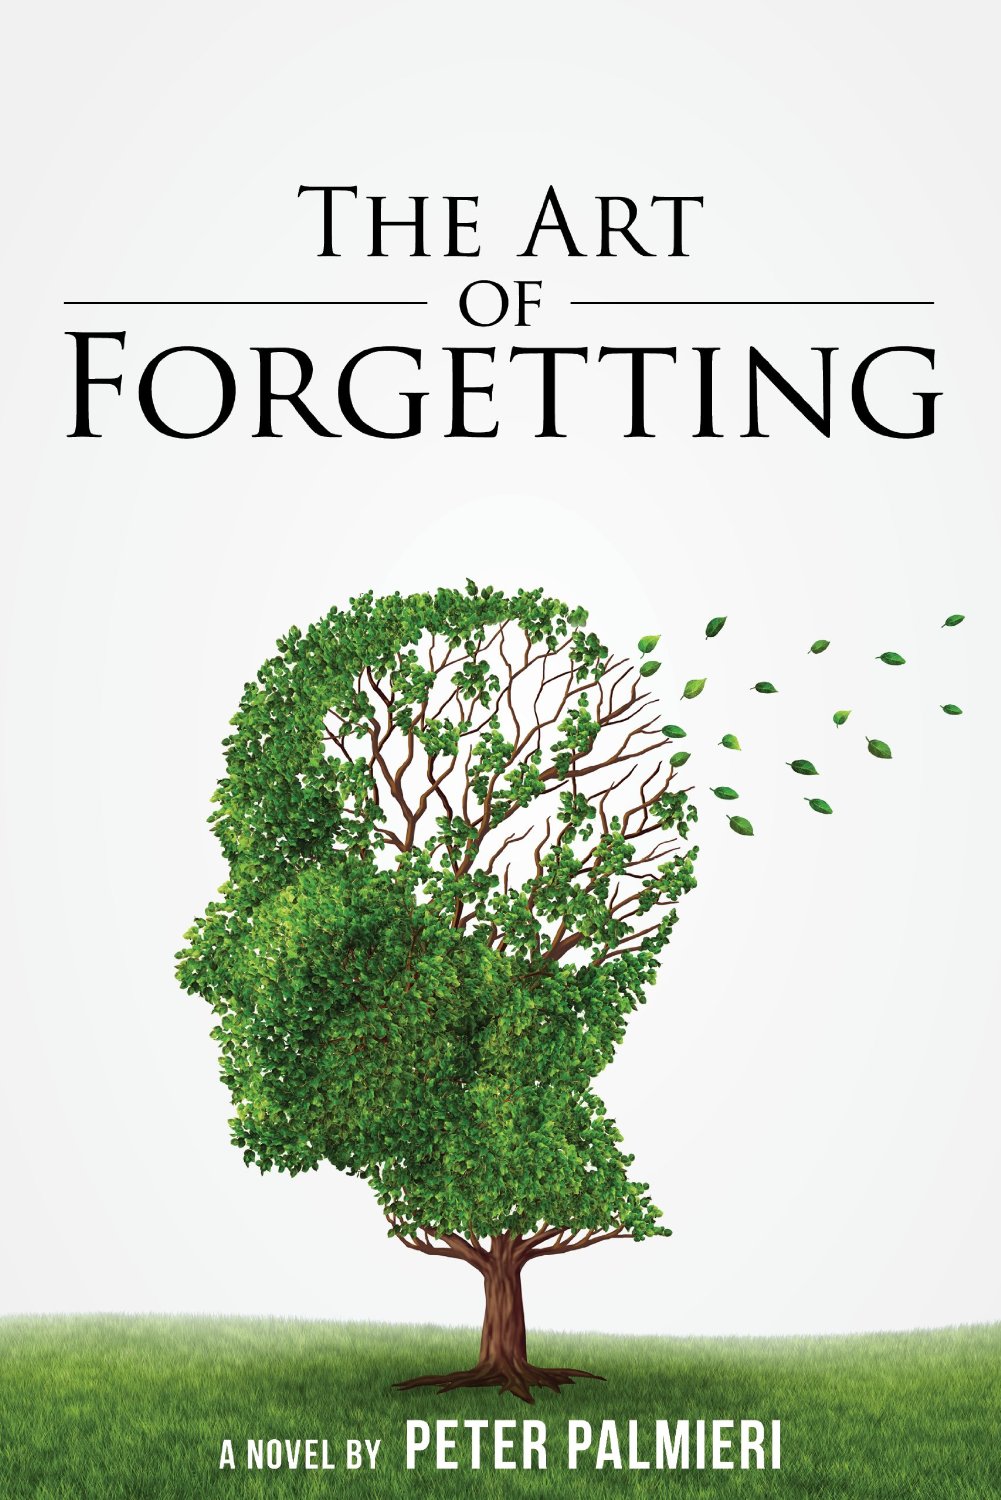 The Art of Forgetting by Peter Palmieri